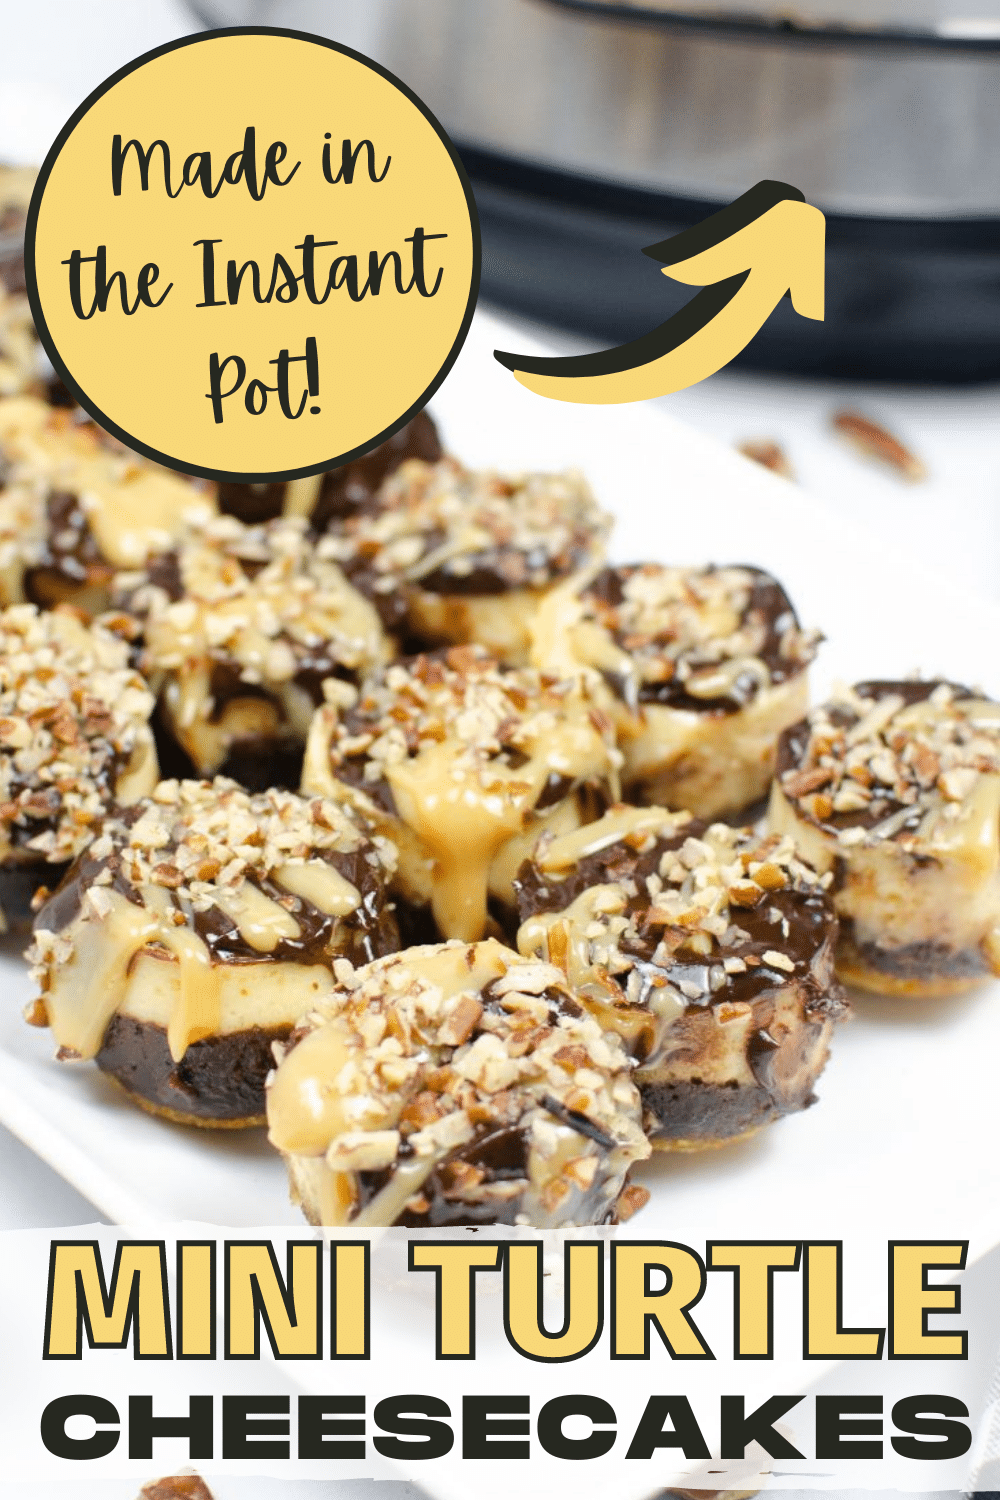 These mini turtle cheesecakes are an absolute treat! Made in an instant pot they're a heaven of creamy cheesecake topped with lush caramel, rich chocolate ganache, and crushed pecans. #instantpot #pressurecooker #cheesecake #turtlecheesecake via @wondermomwannab